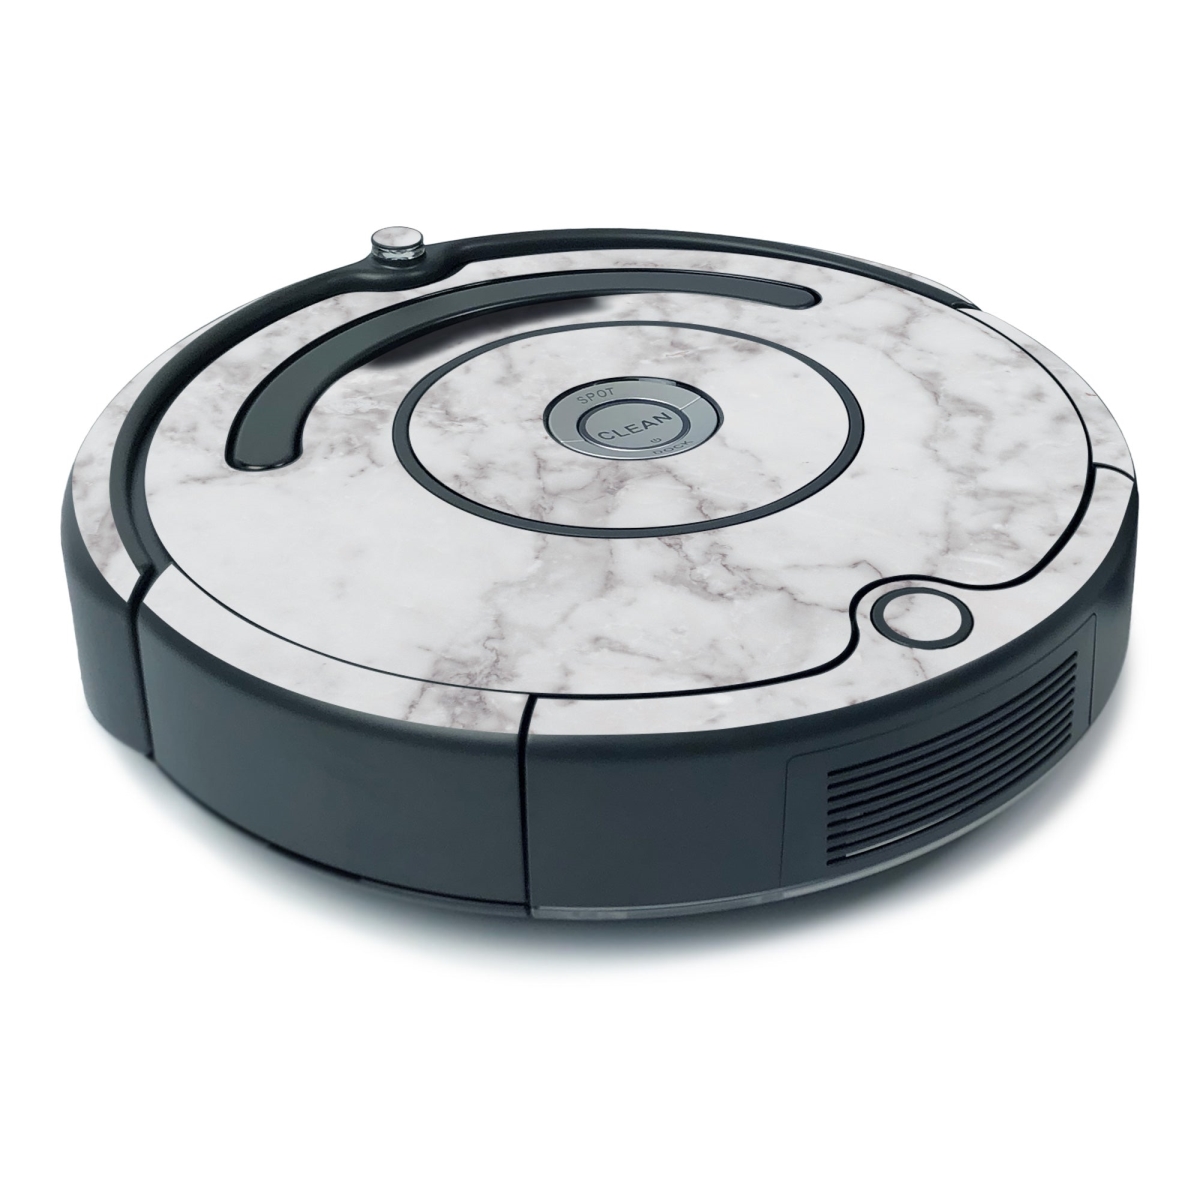 Picture of MightySkins IRRO675MIN-Frost Marble Skin for iRobot Roomba 675 Minimal Coverage - Frost Marble